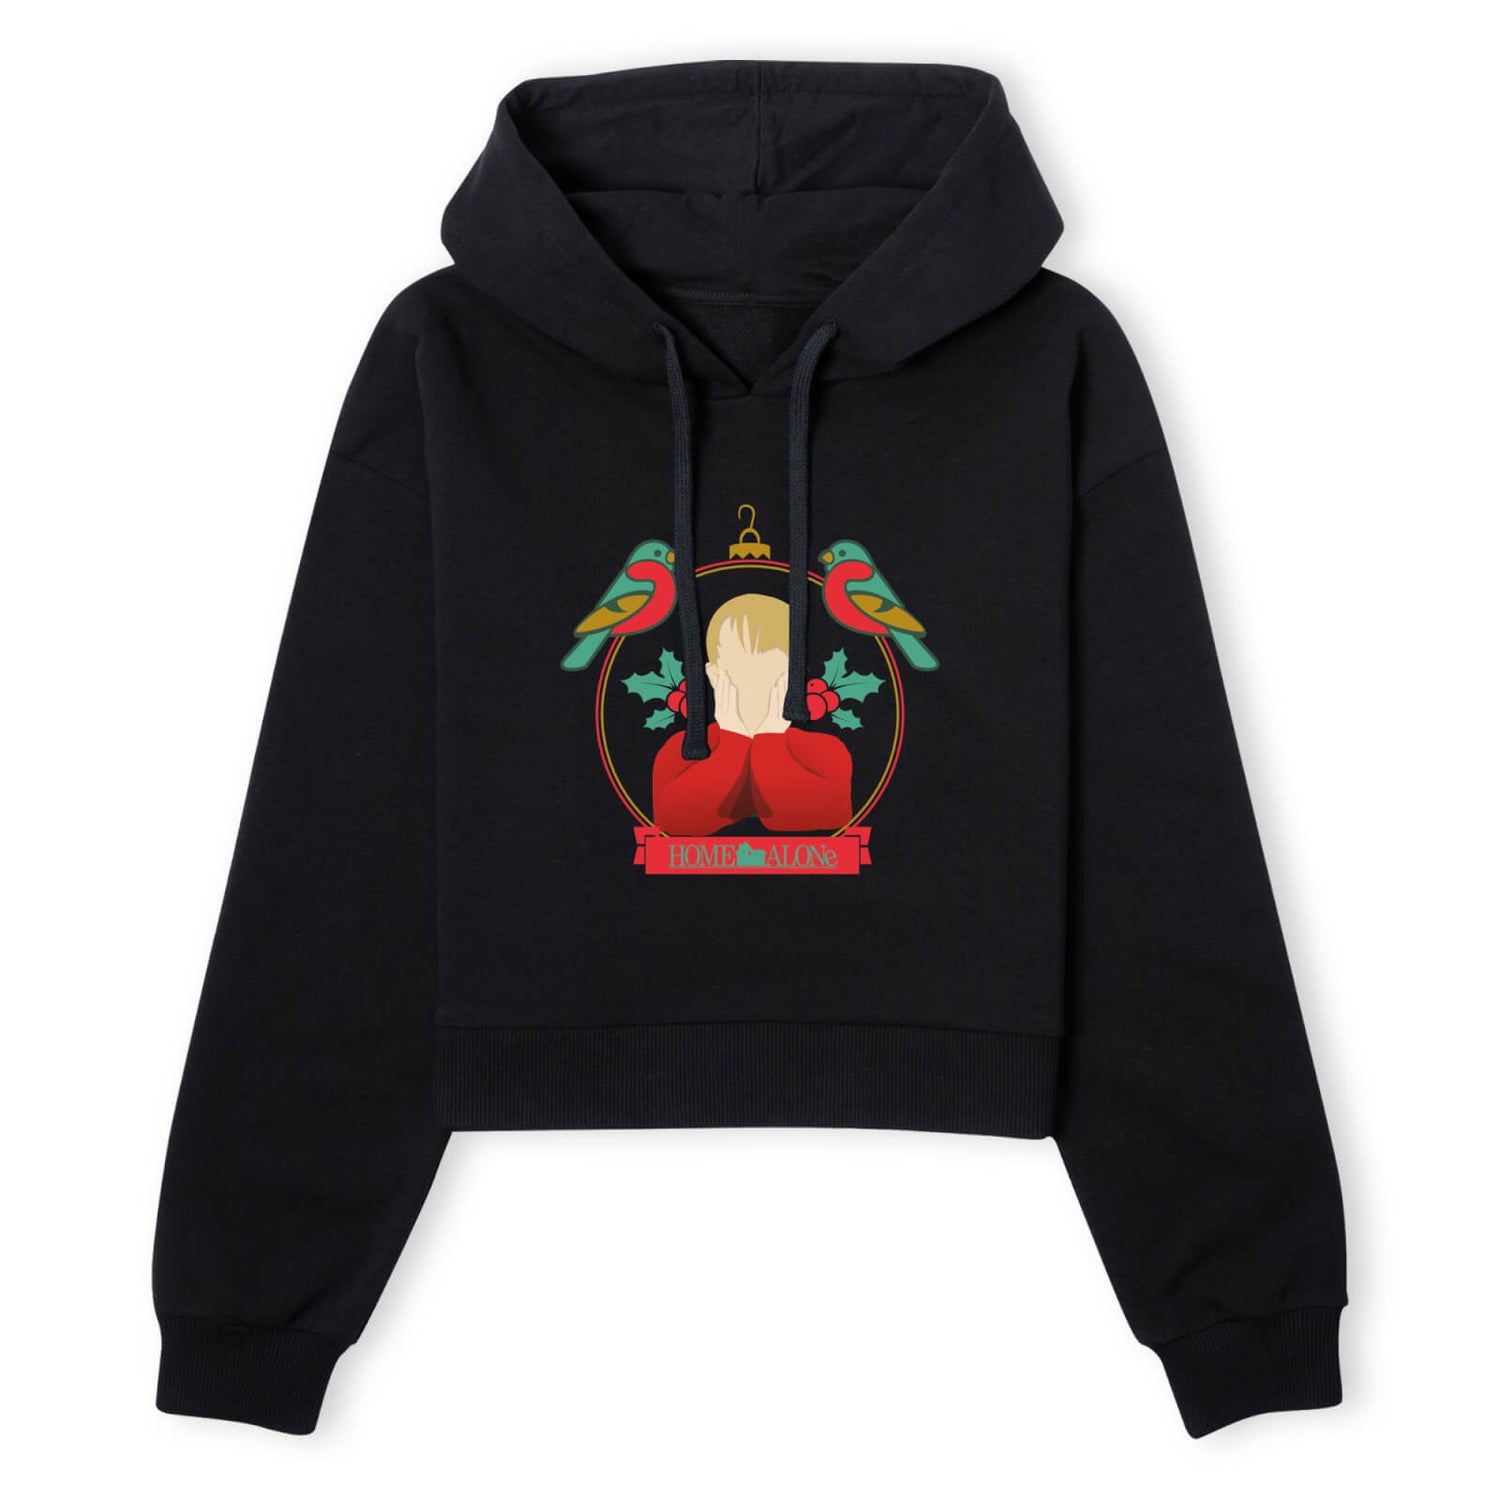 Home Alone Christmas Bauble Women's Cropped Hoodie - Black